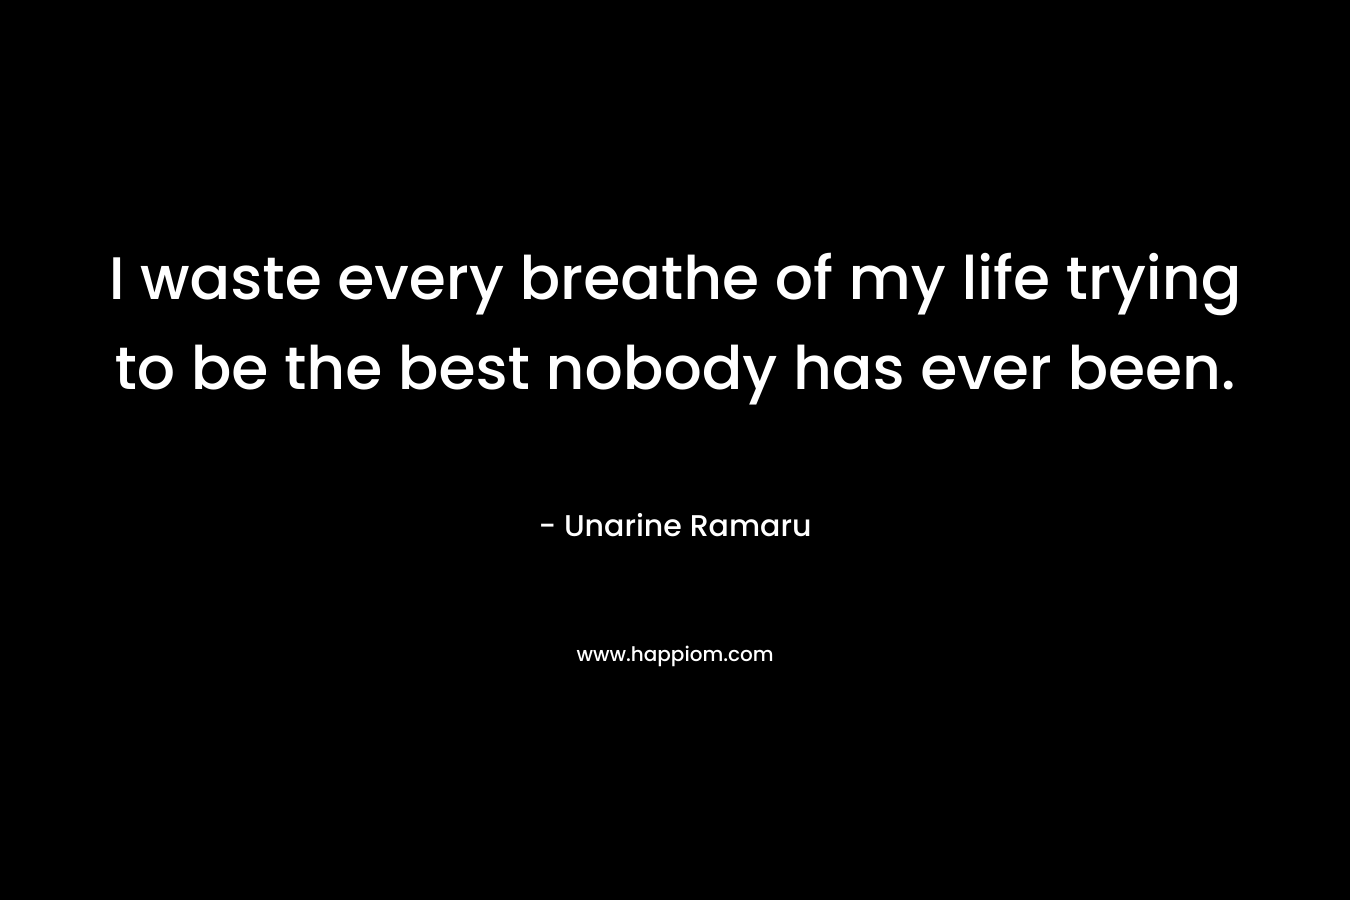 I waste every breathe of my life trying to be the best nobody has ever been.